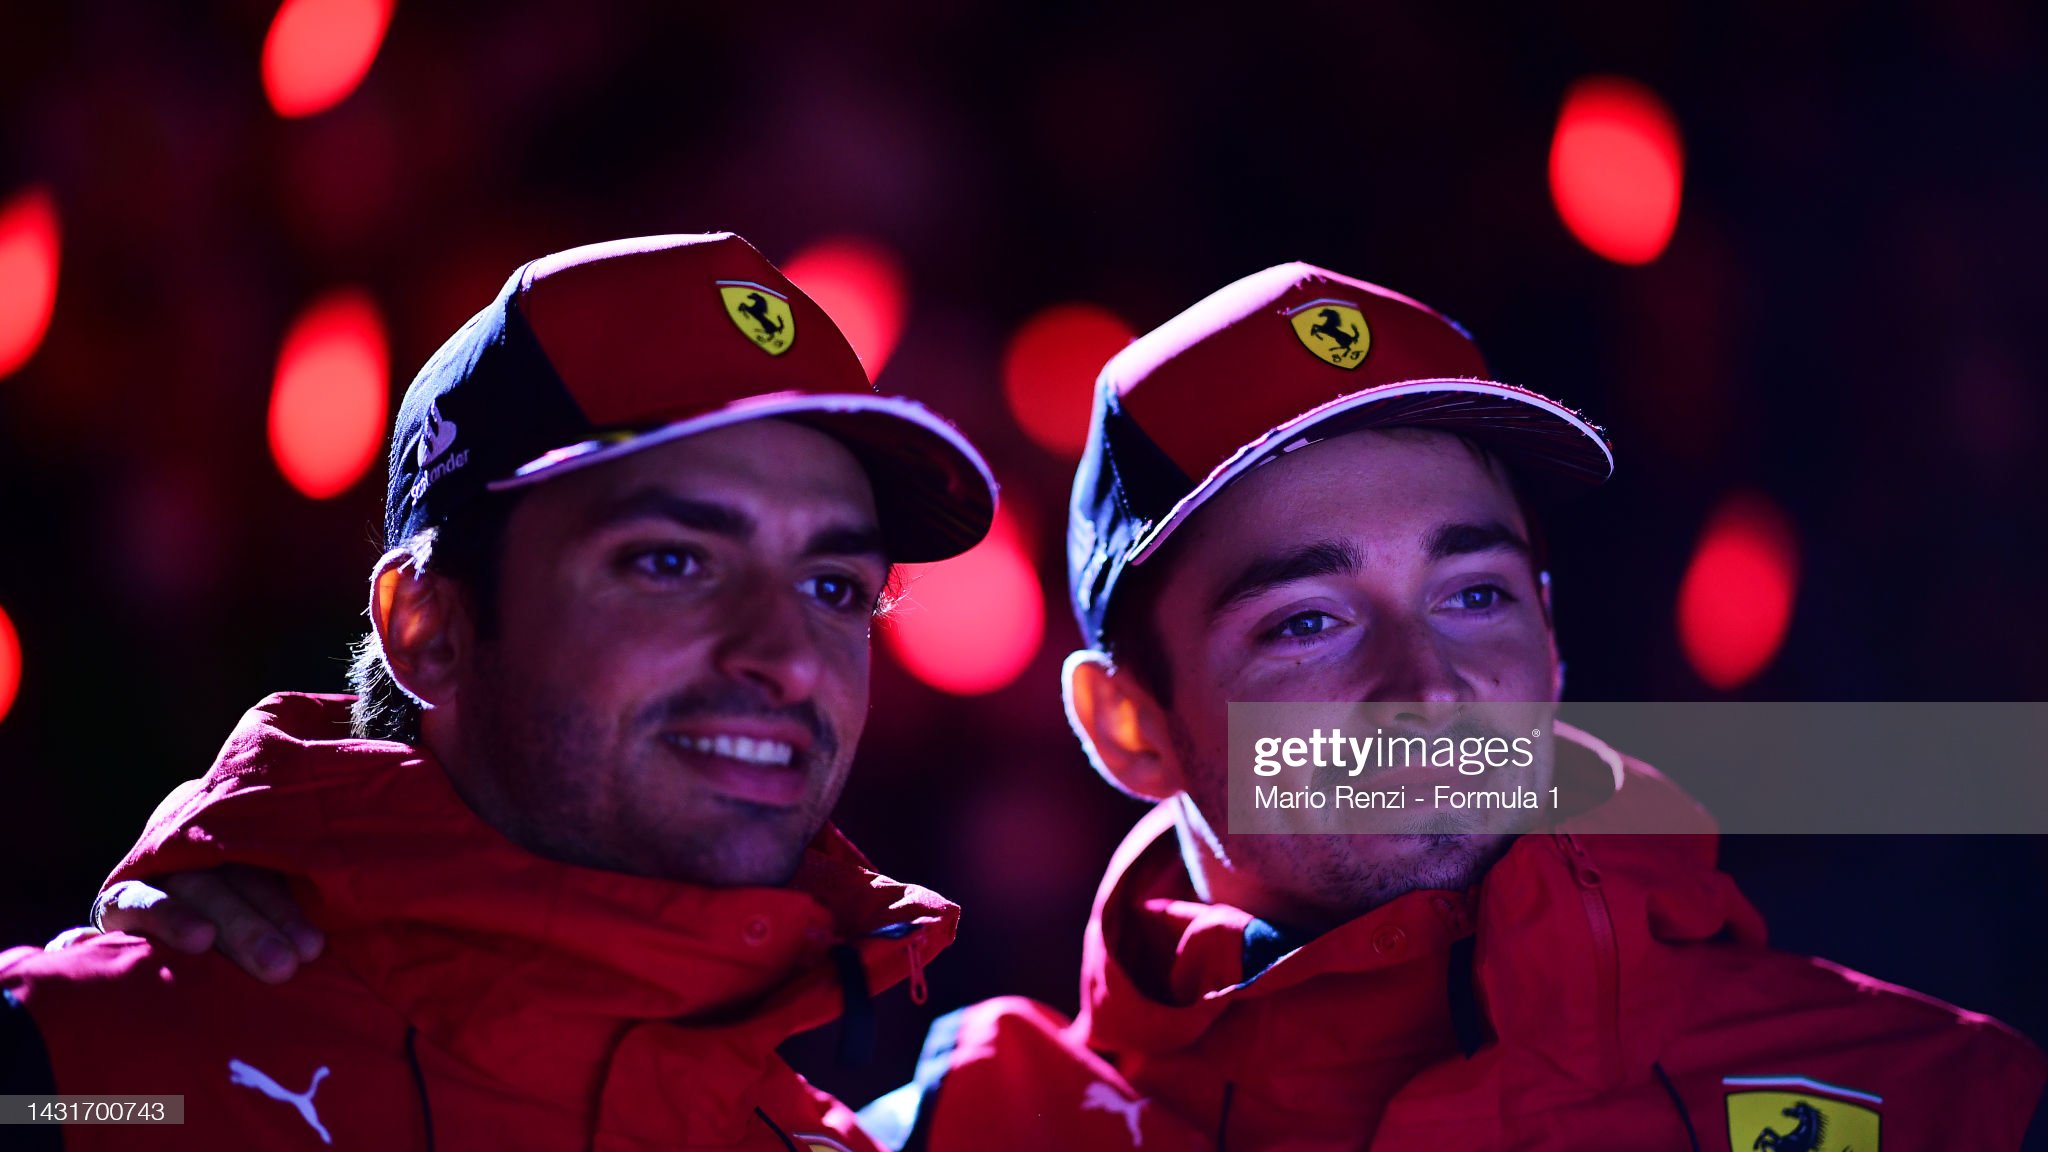 Charles Leclerc and Carlos Sainz pose for a photo.